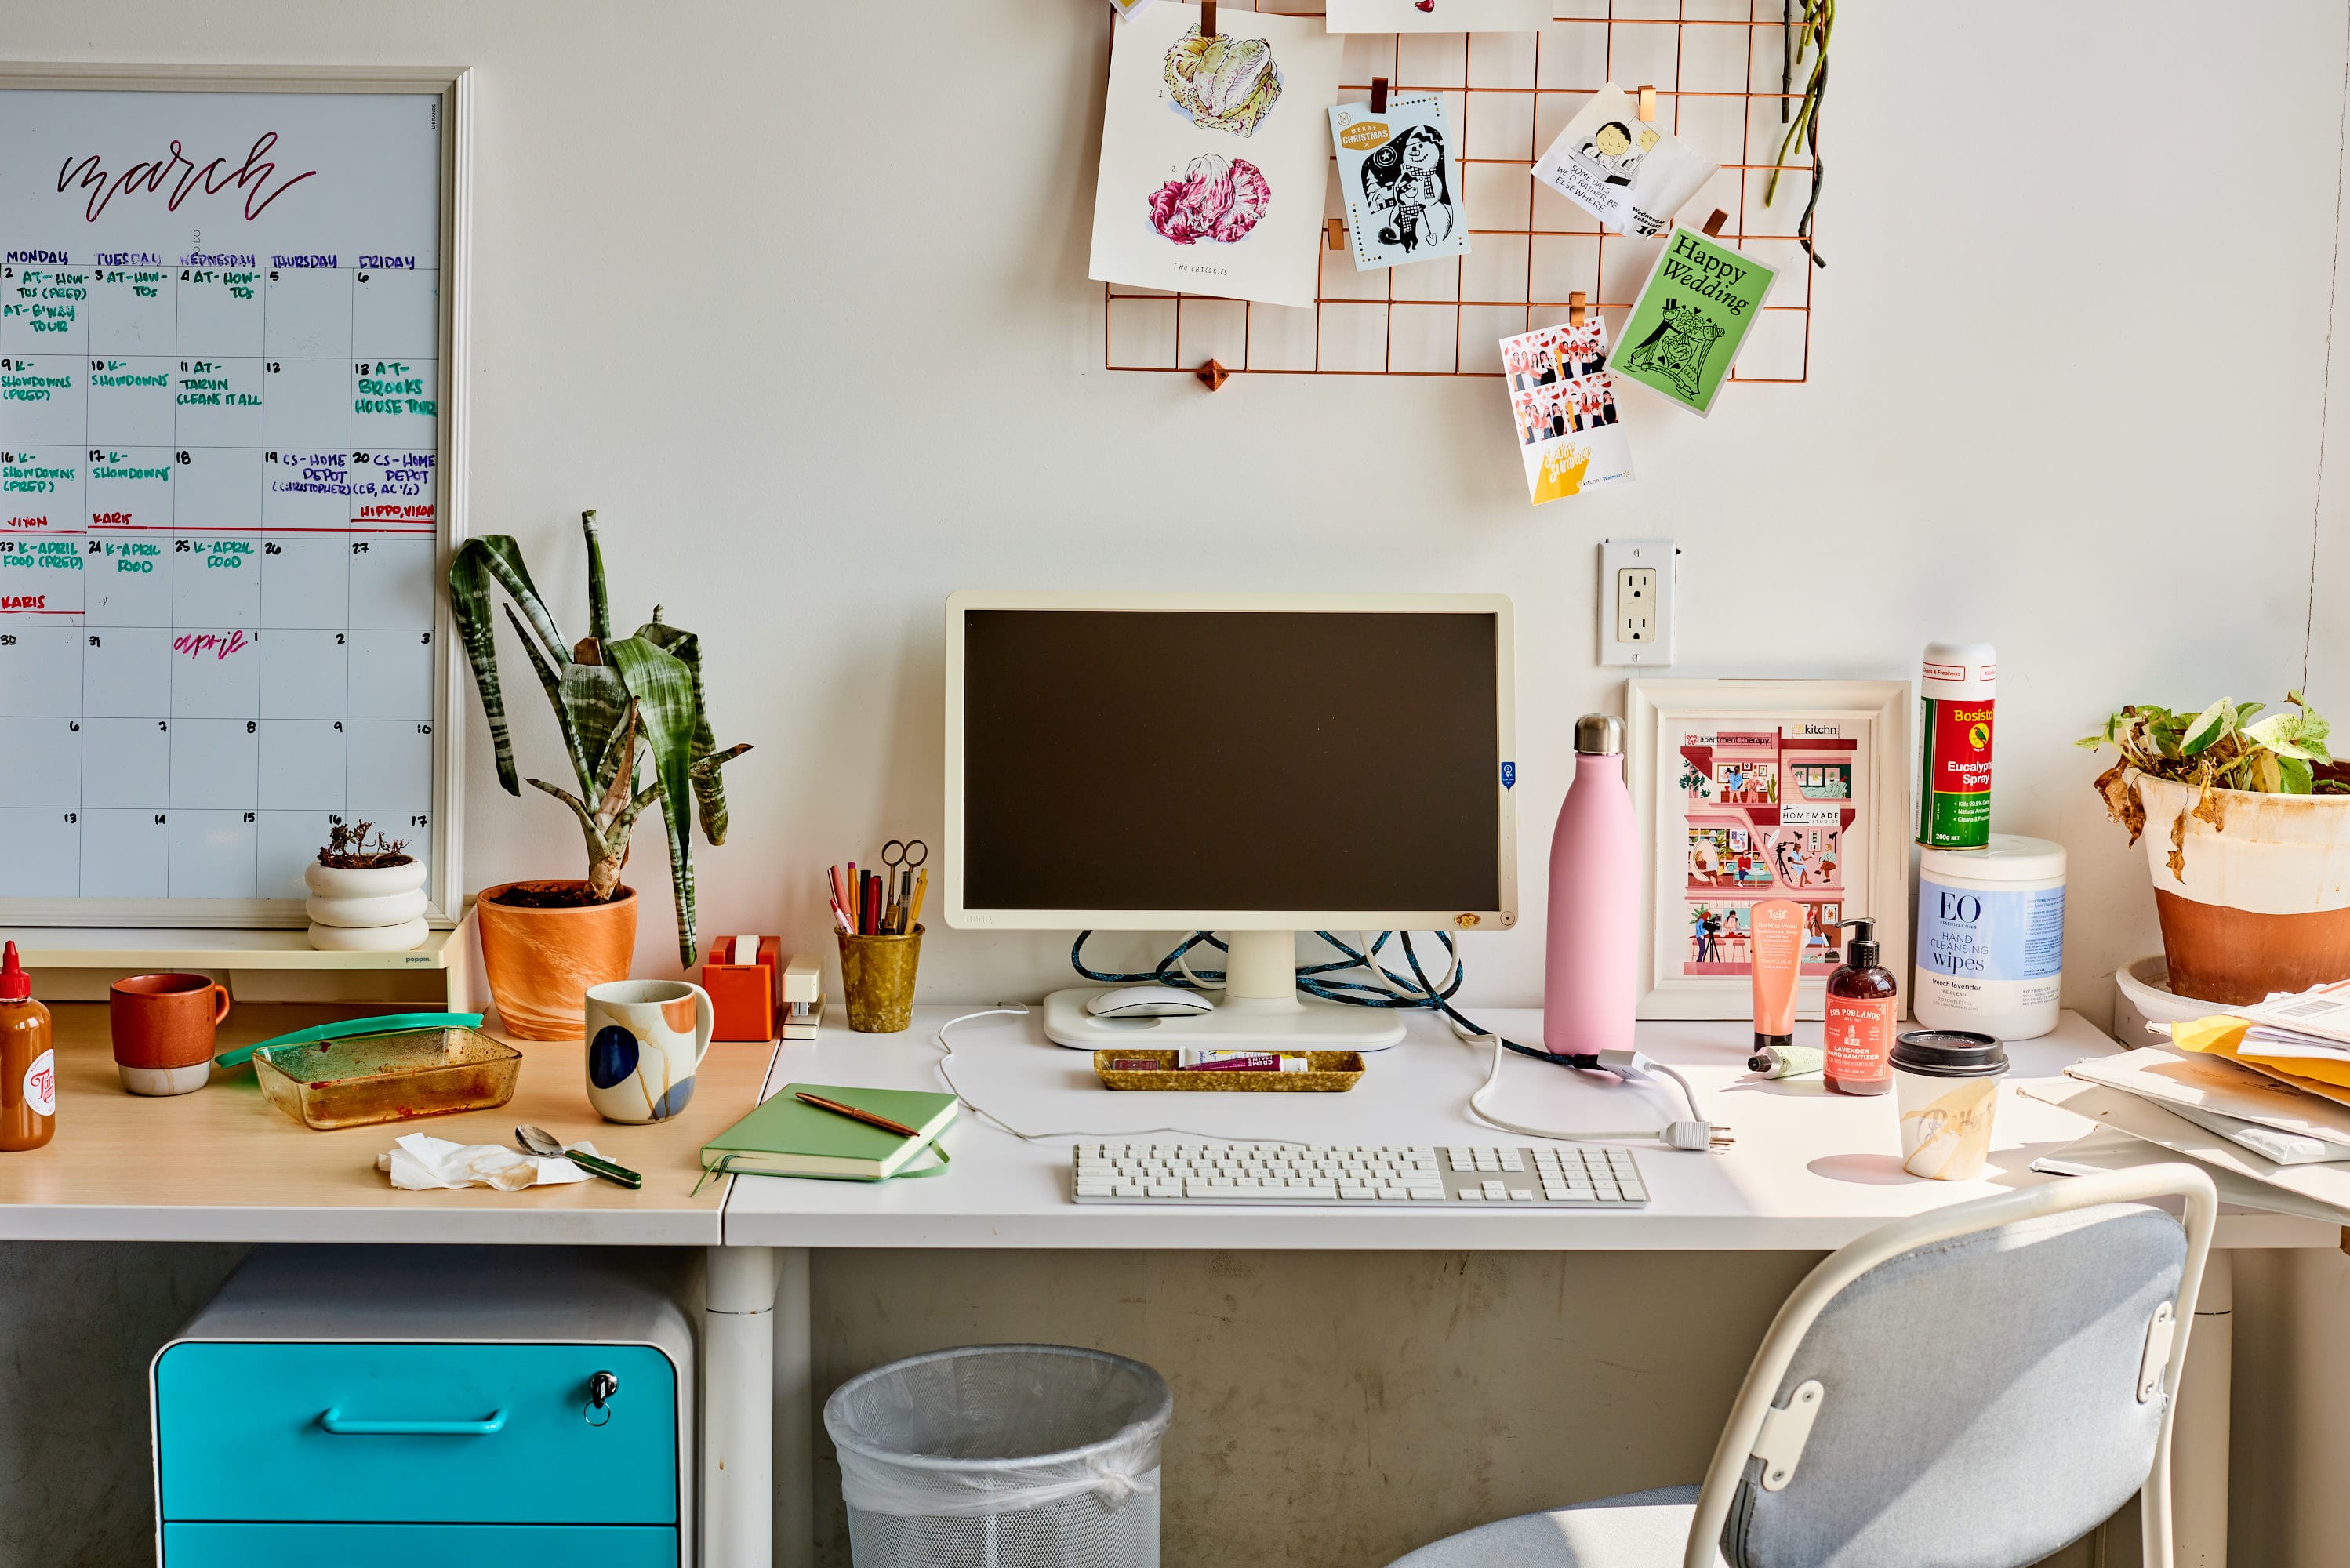 The Best Standing Desks for Working From Home in 2022